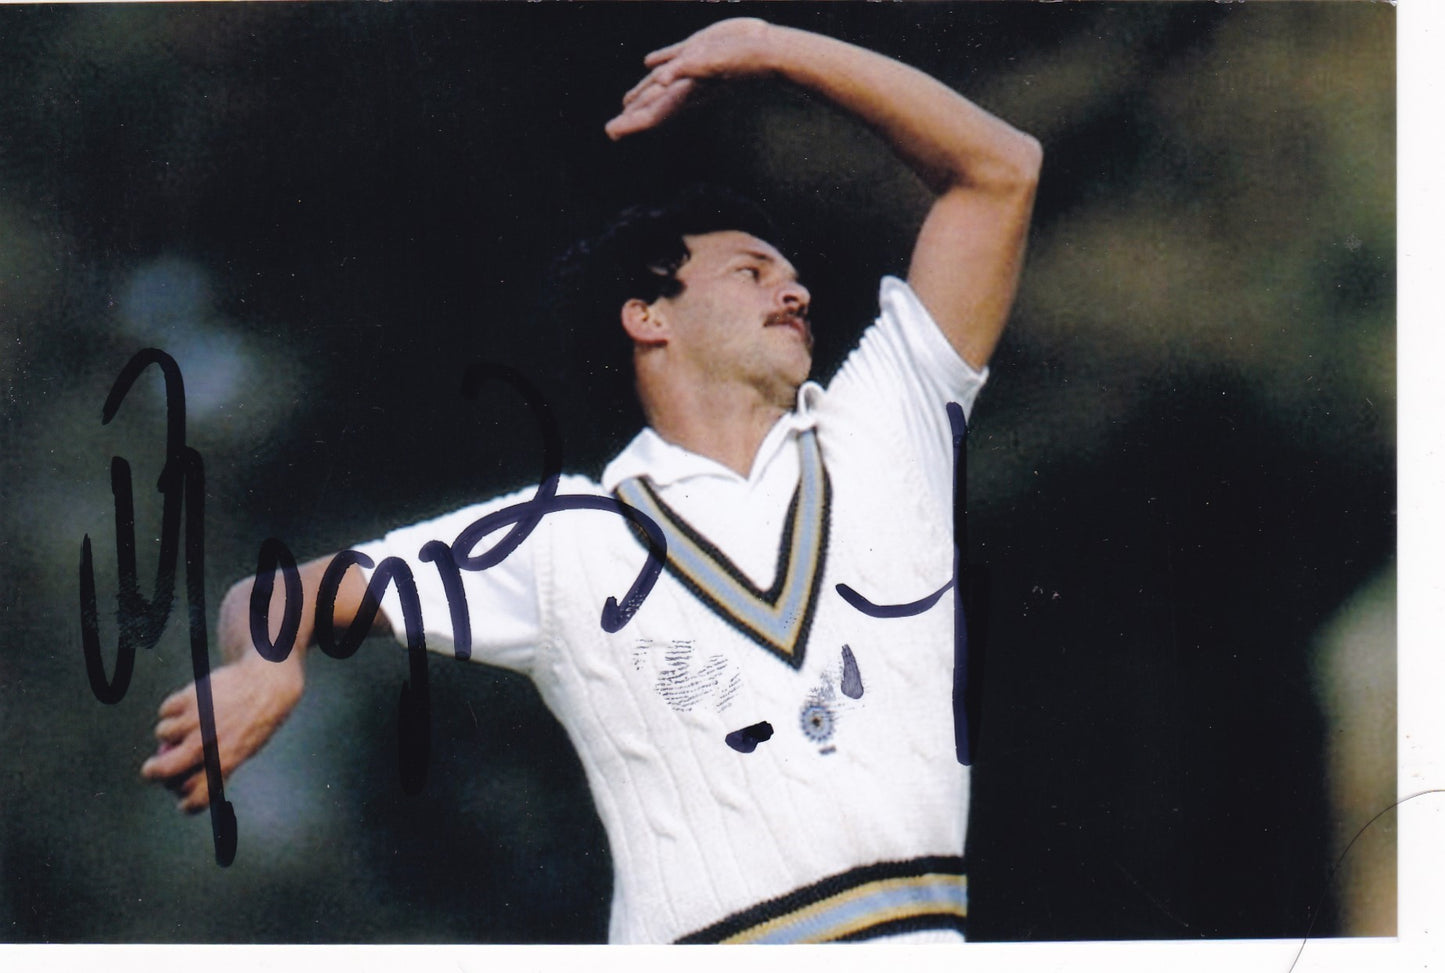 Autograph in Cricketer-Roger Binny in Colour Photo.